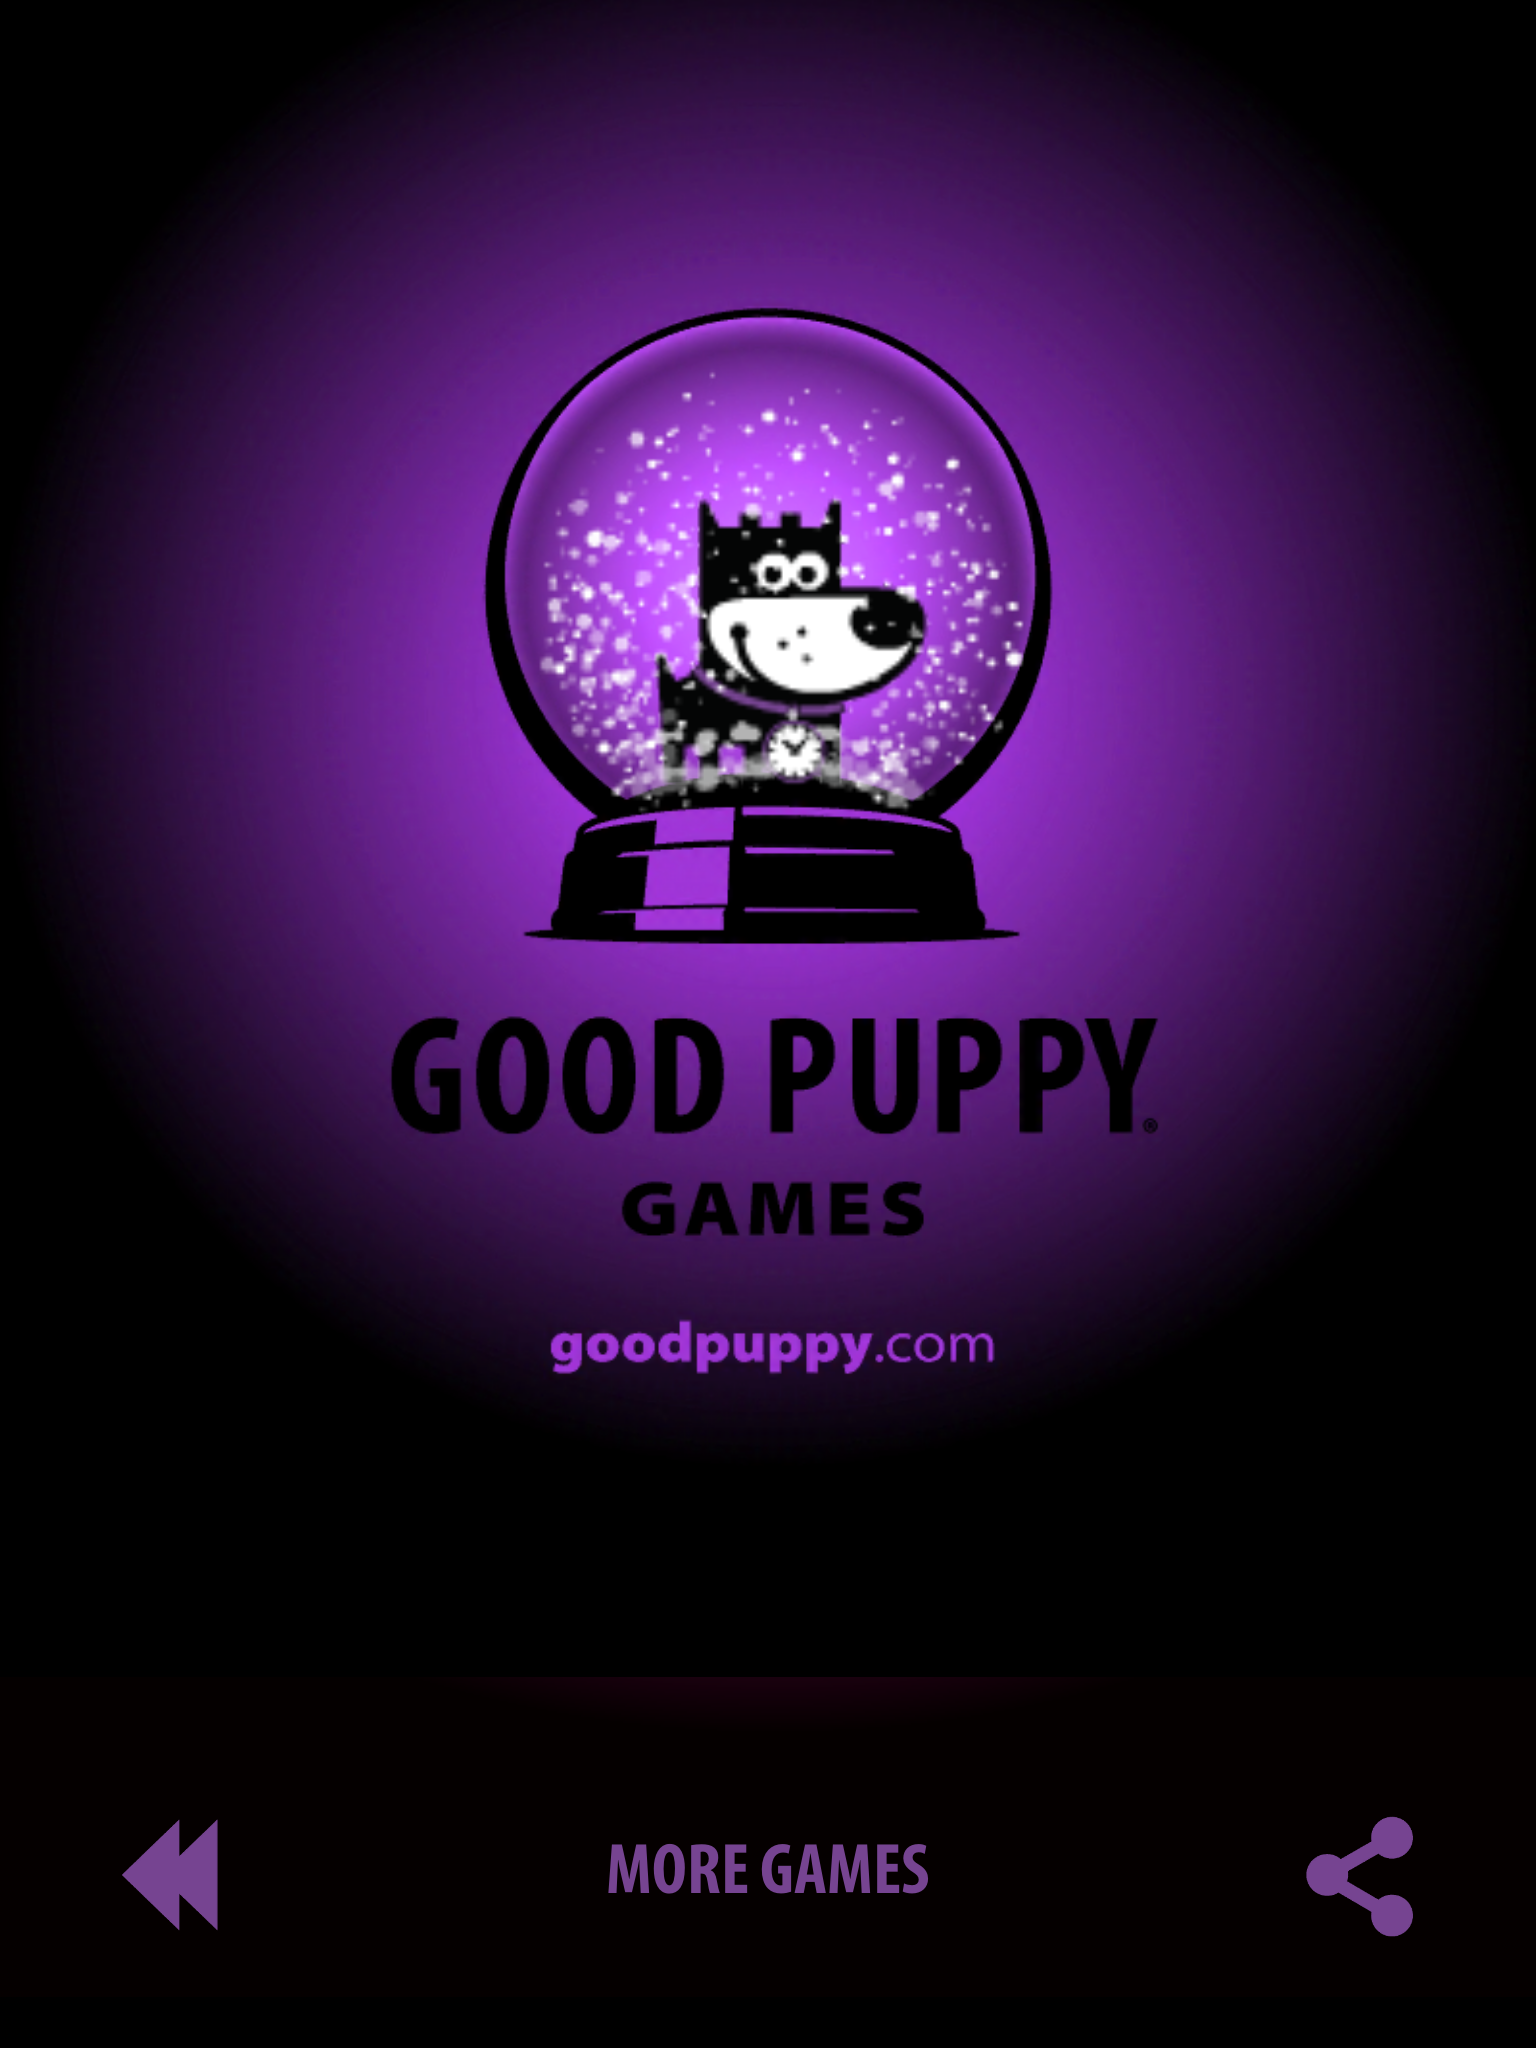 GOOD-PUPPY-DIG-Infinite-Runner-Fast-Retro-Arcade-Game-16.png